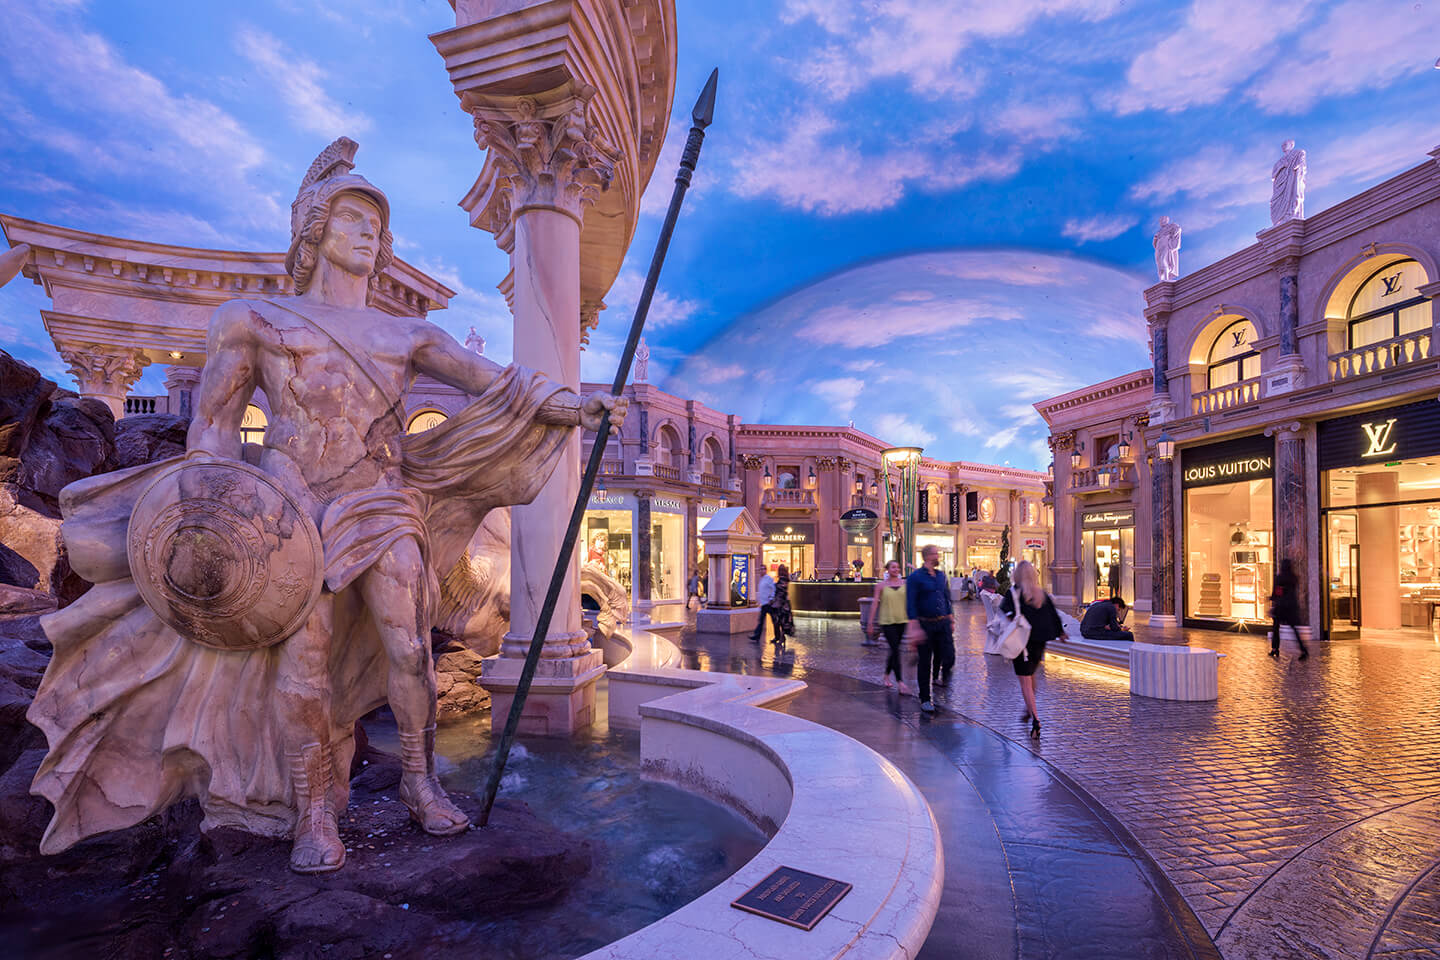 About The Forum Shops at Caesars Palace® - A Shopping Center in Las Vegas,  NV - A Simon Property